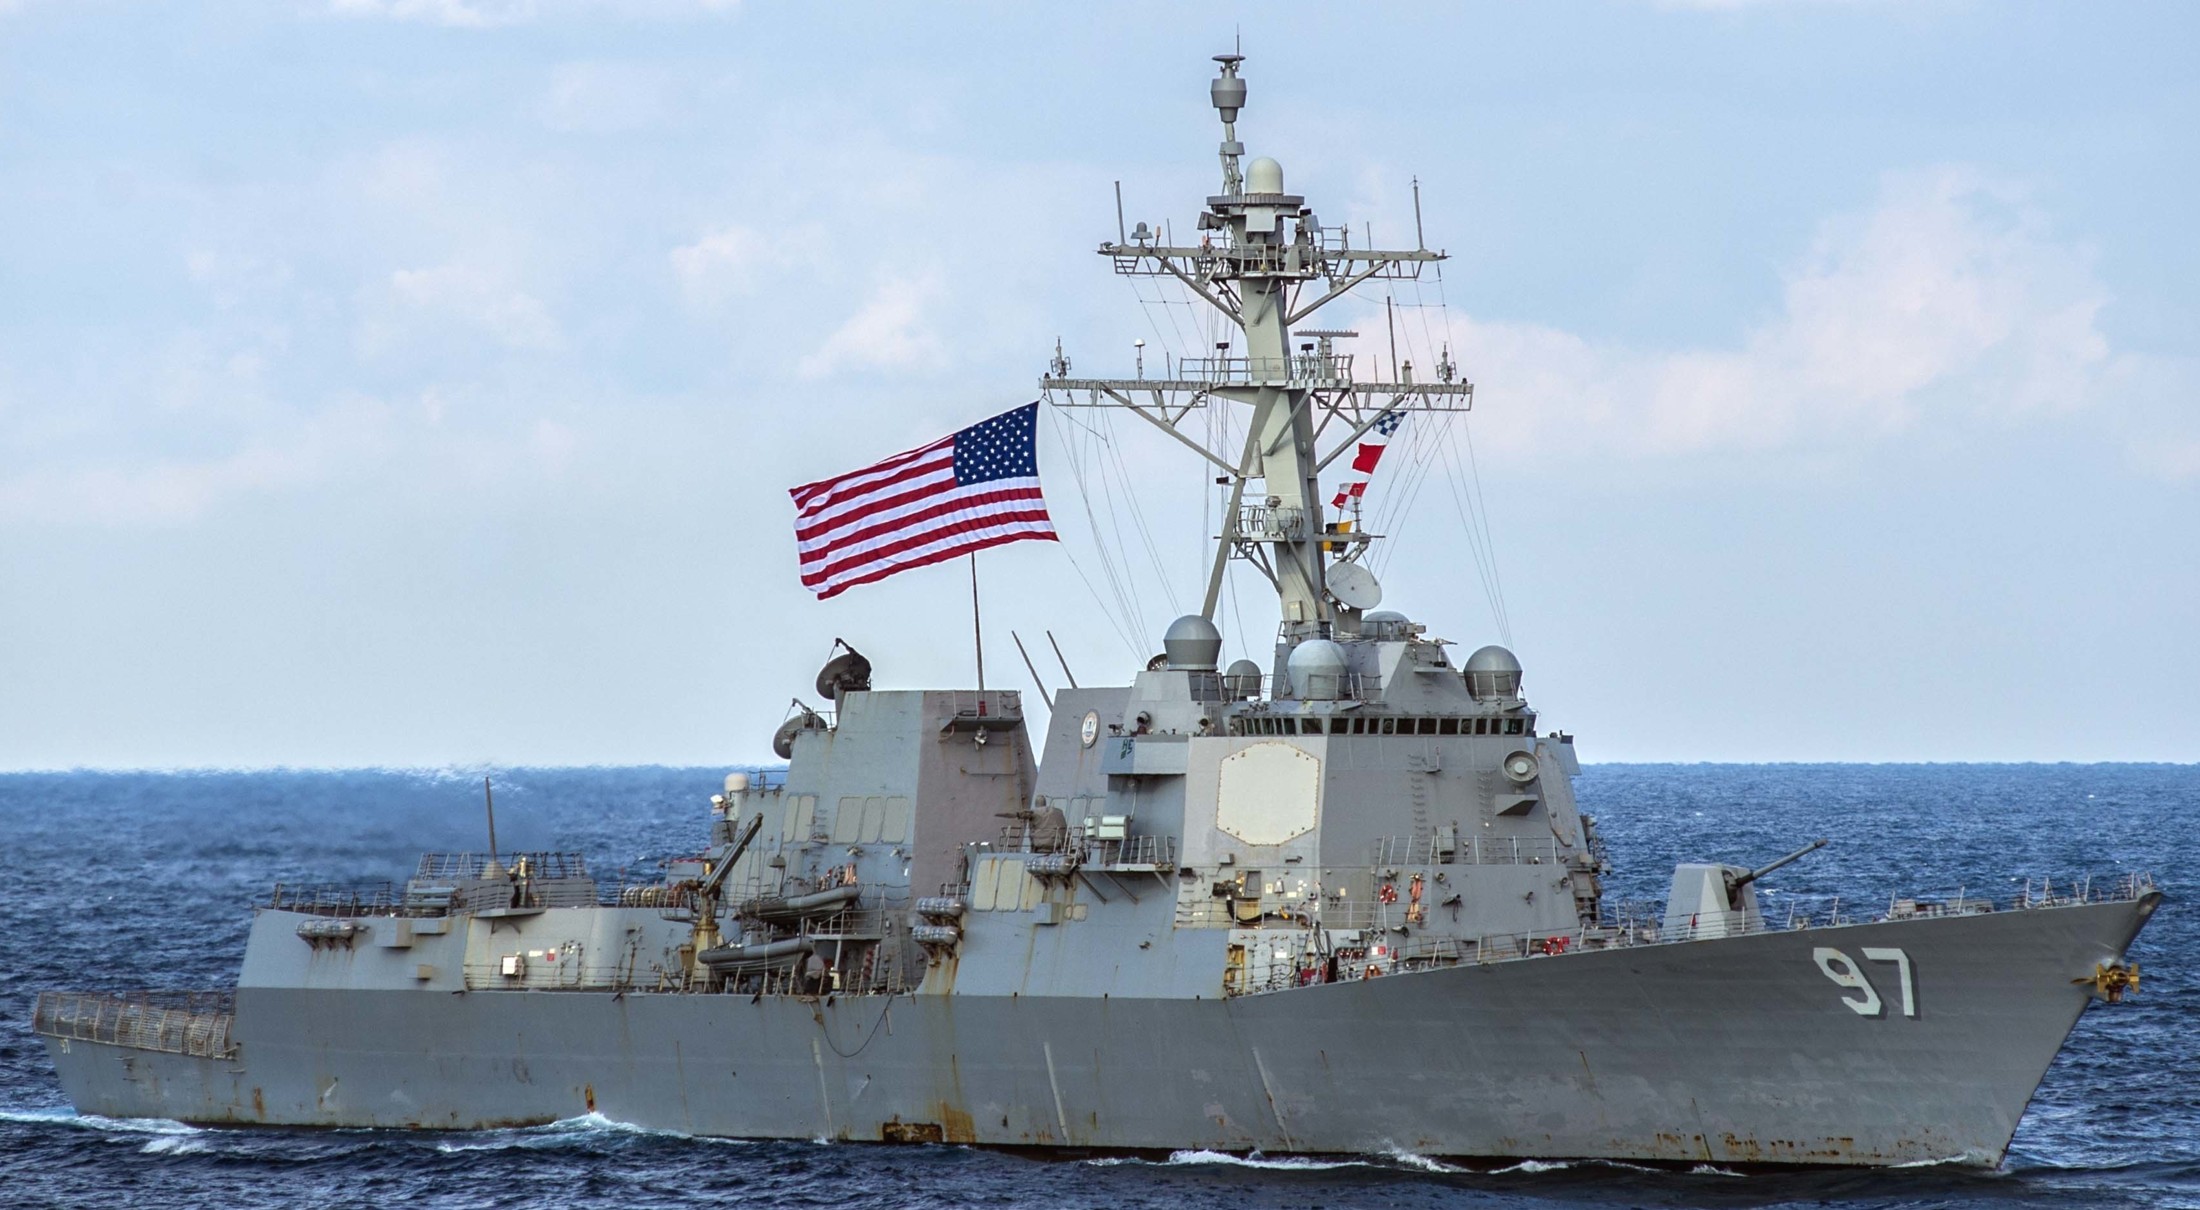 ddg-97 uss halsey arleigh burke class guided missile destroyer aegis us navy ingalls pascagoula 39x